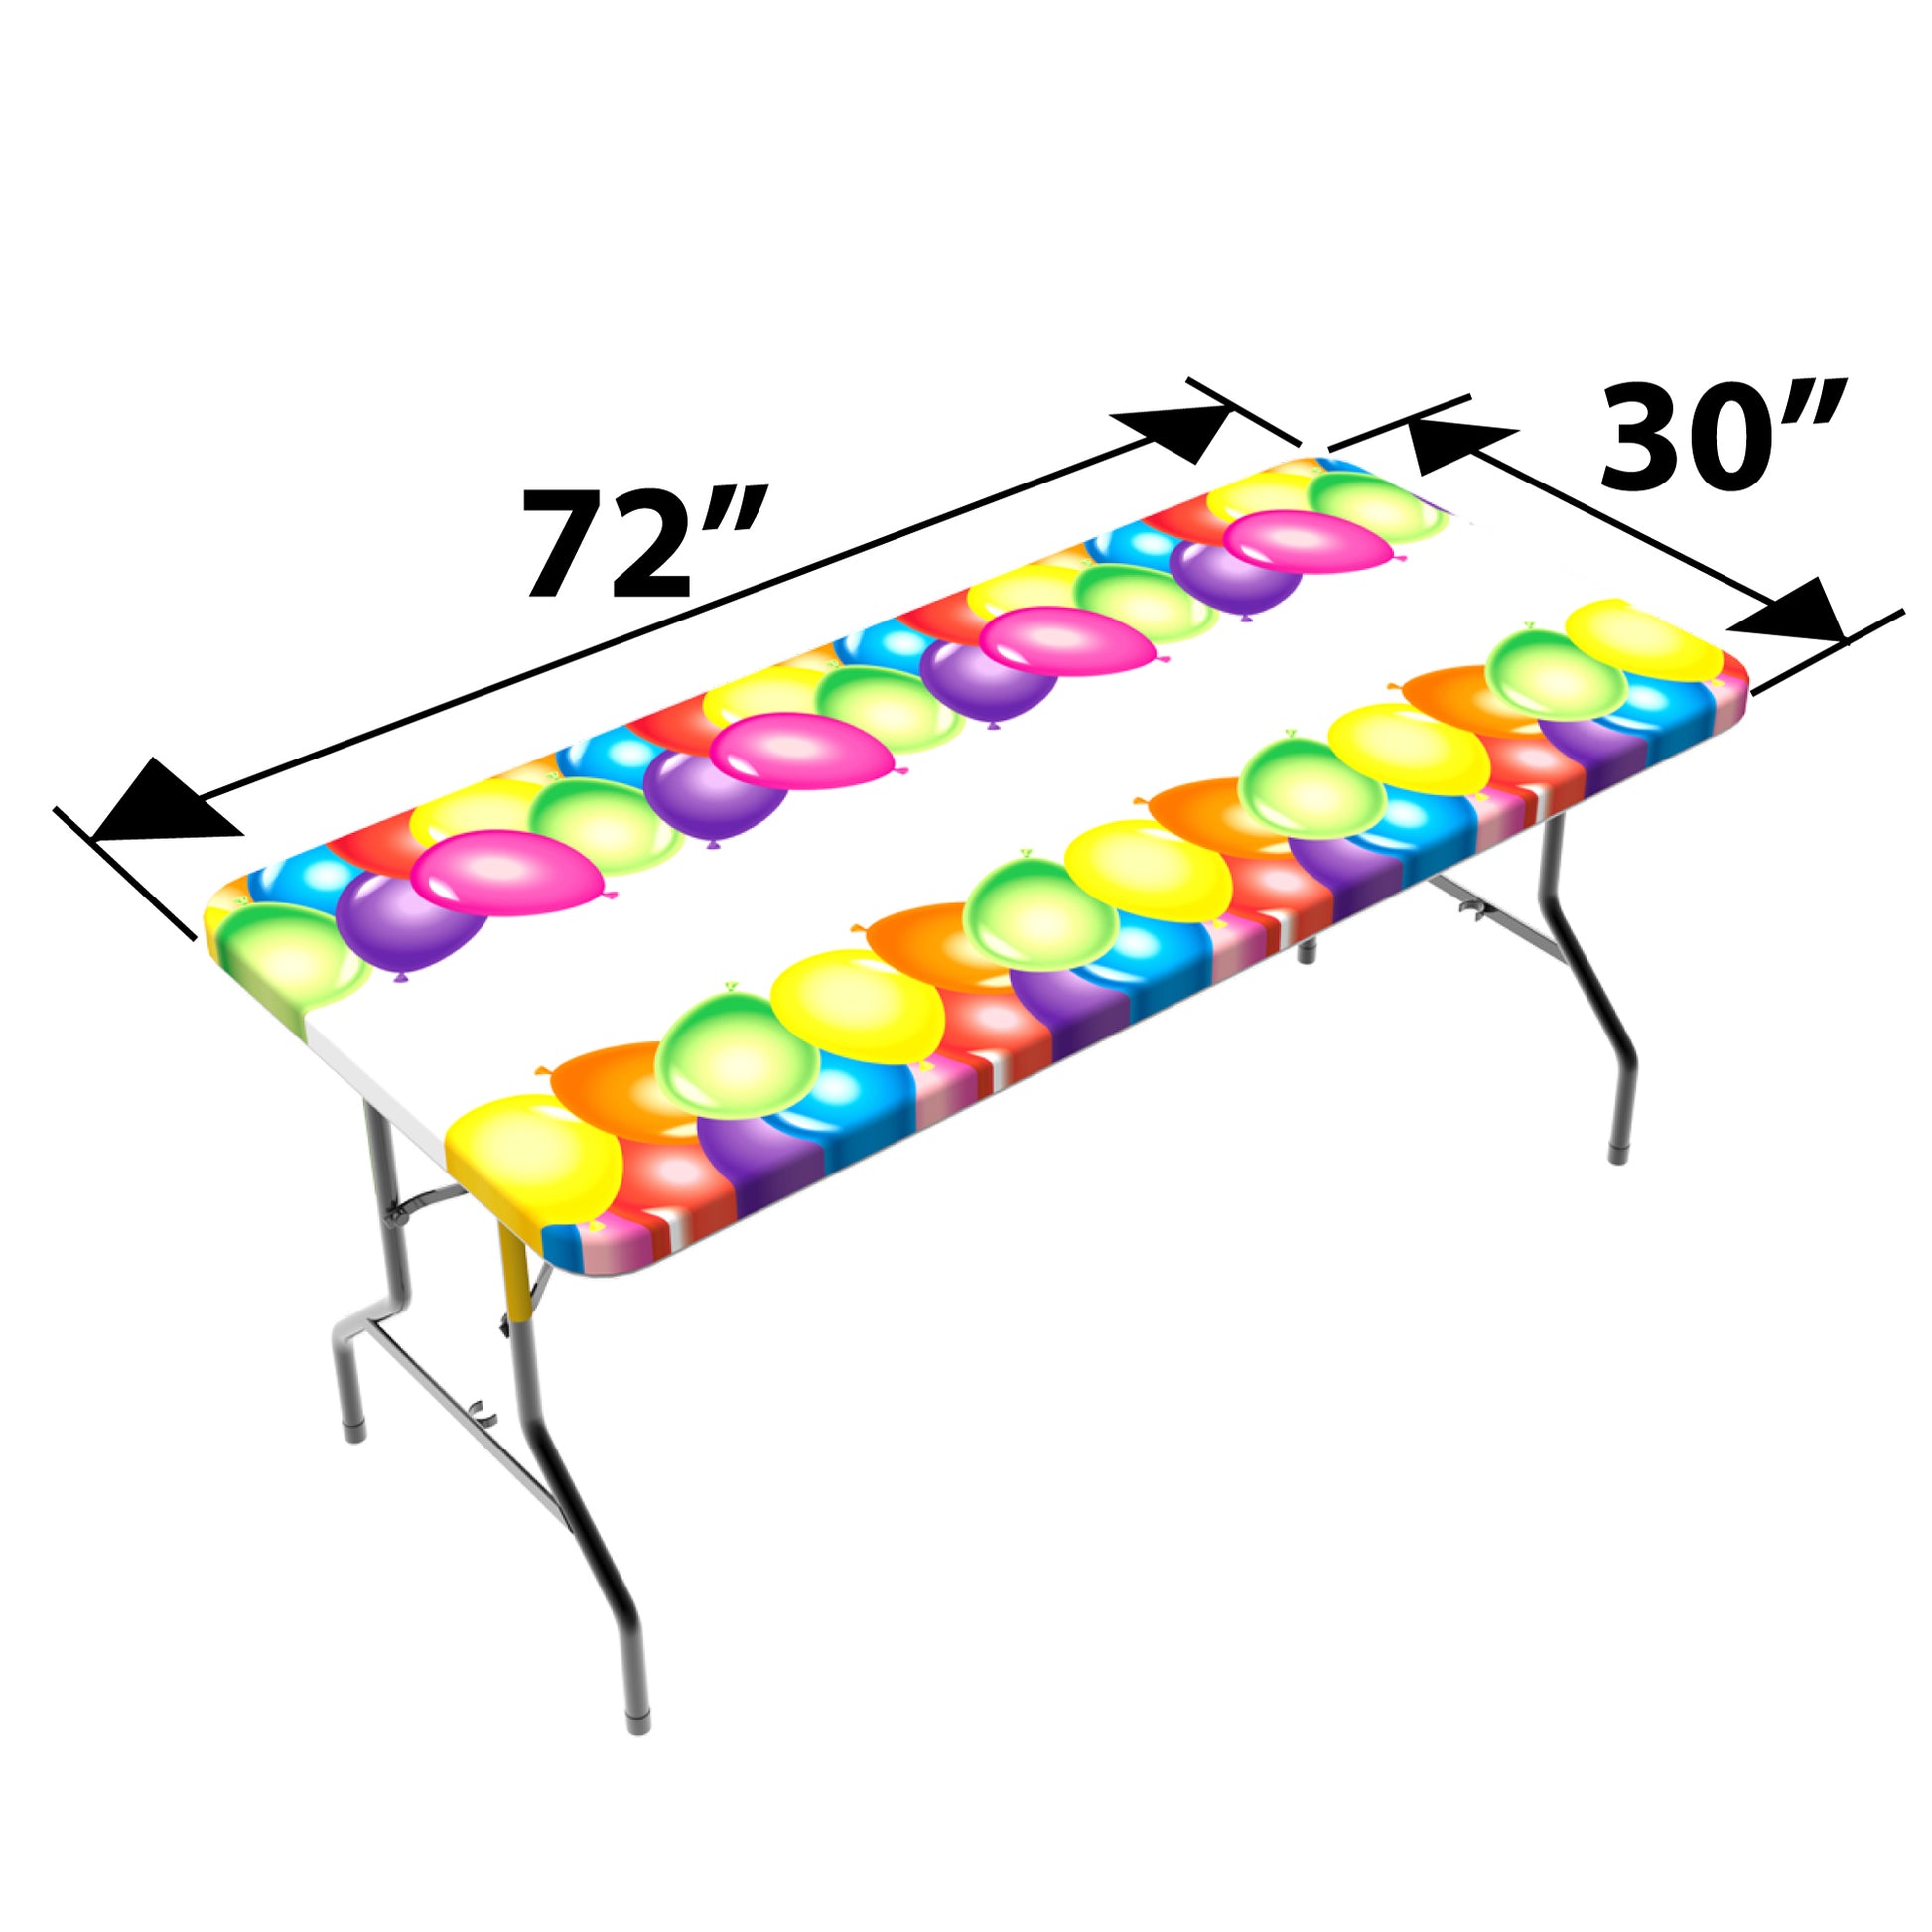 TableCloth PLUS 72" Balloons Fitted PEVA Vinyl Tablecloth for 6' Folding Tables displayed adorning a folding table